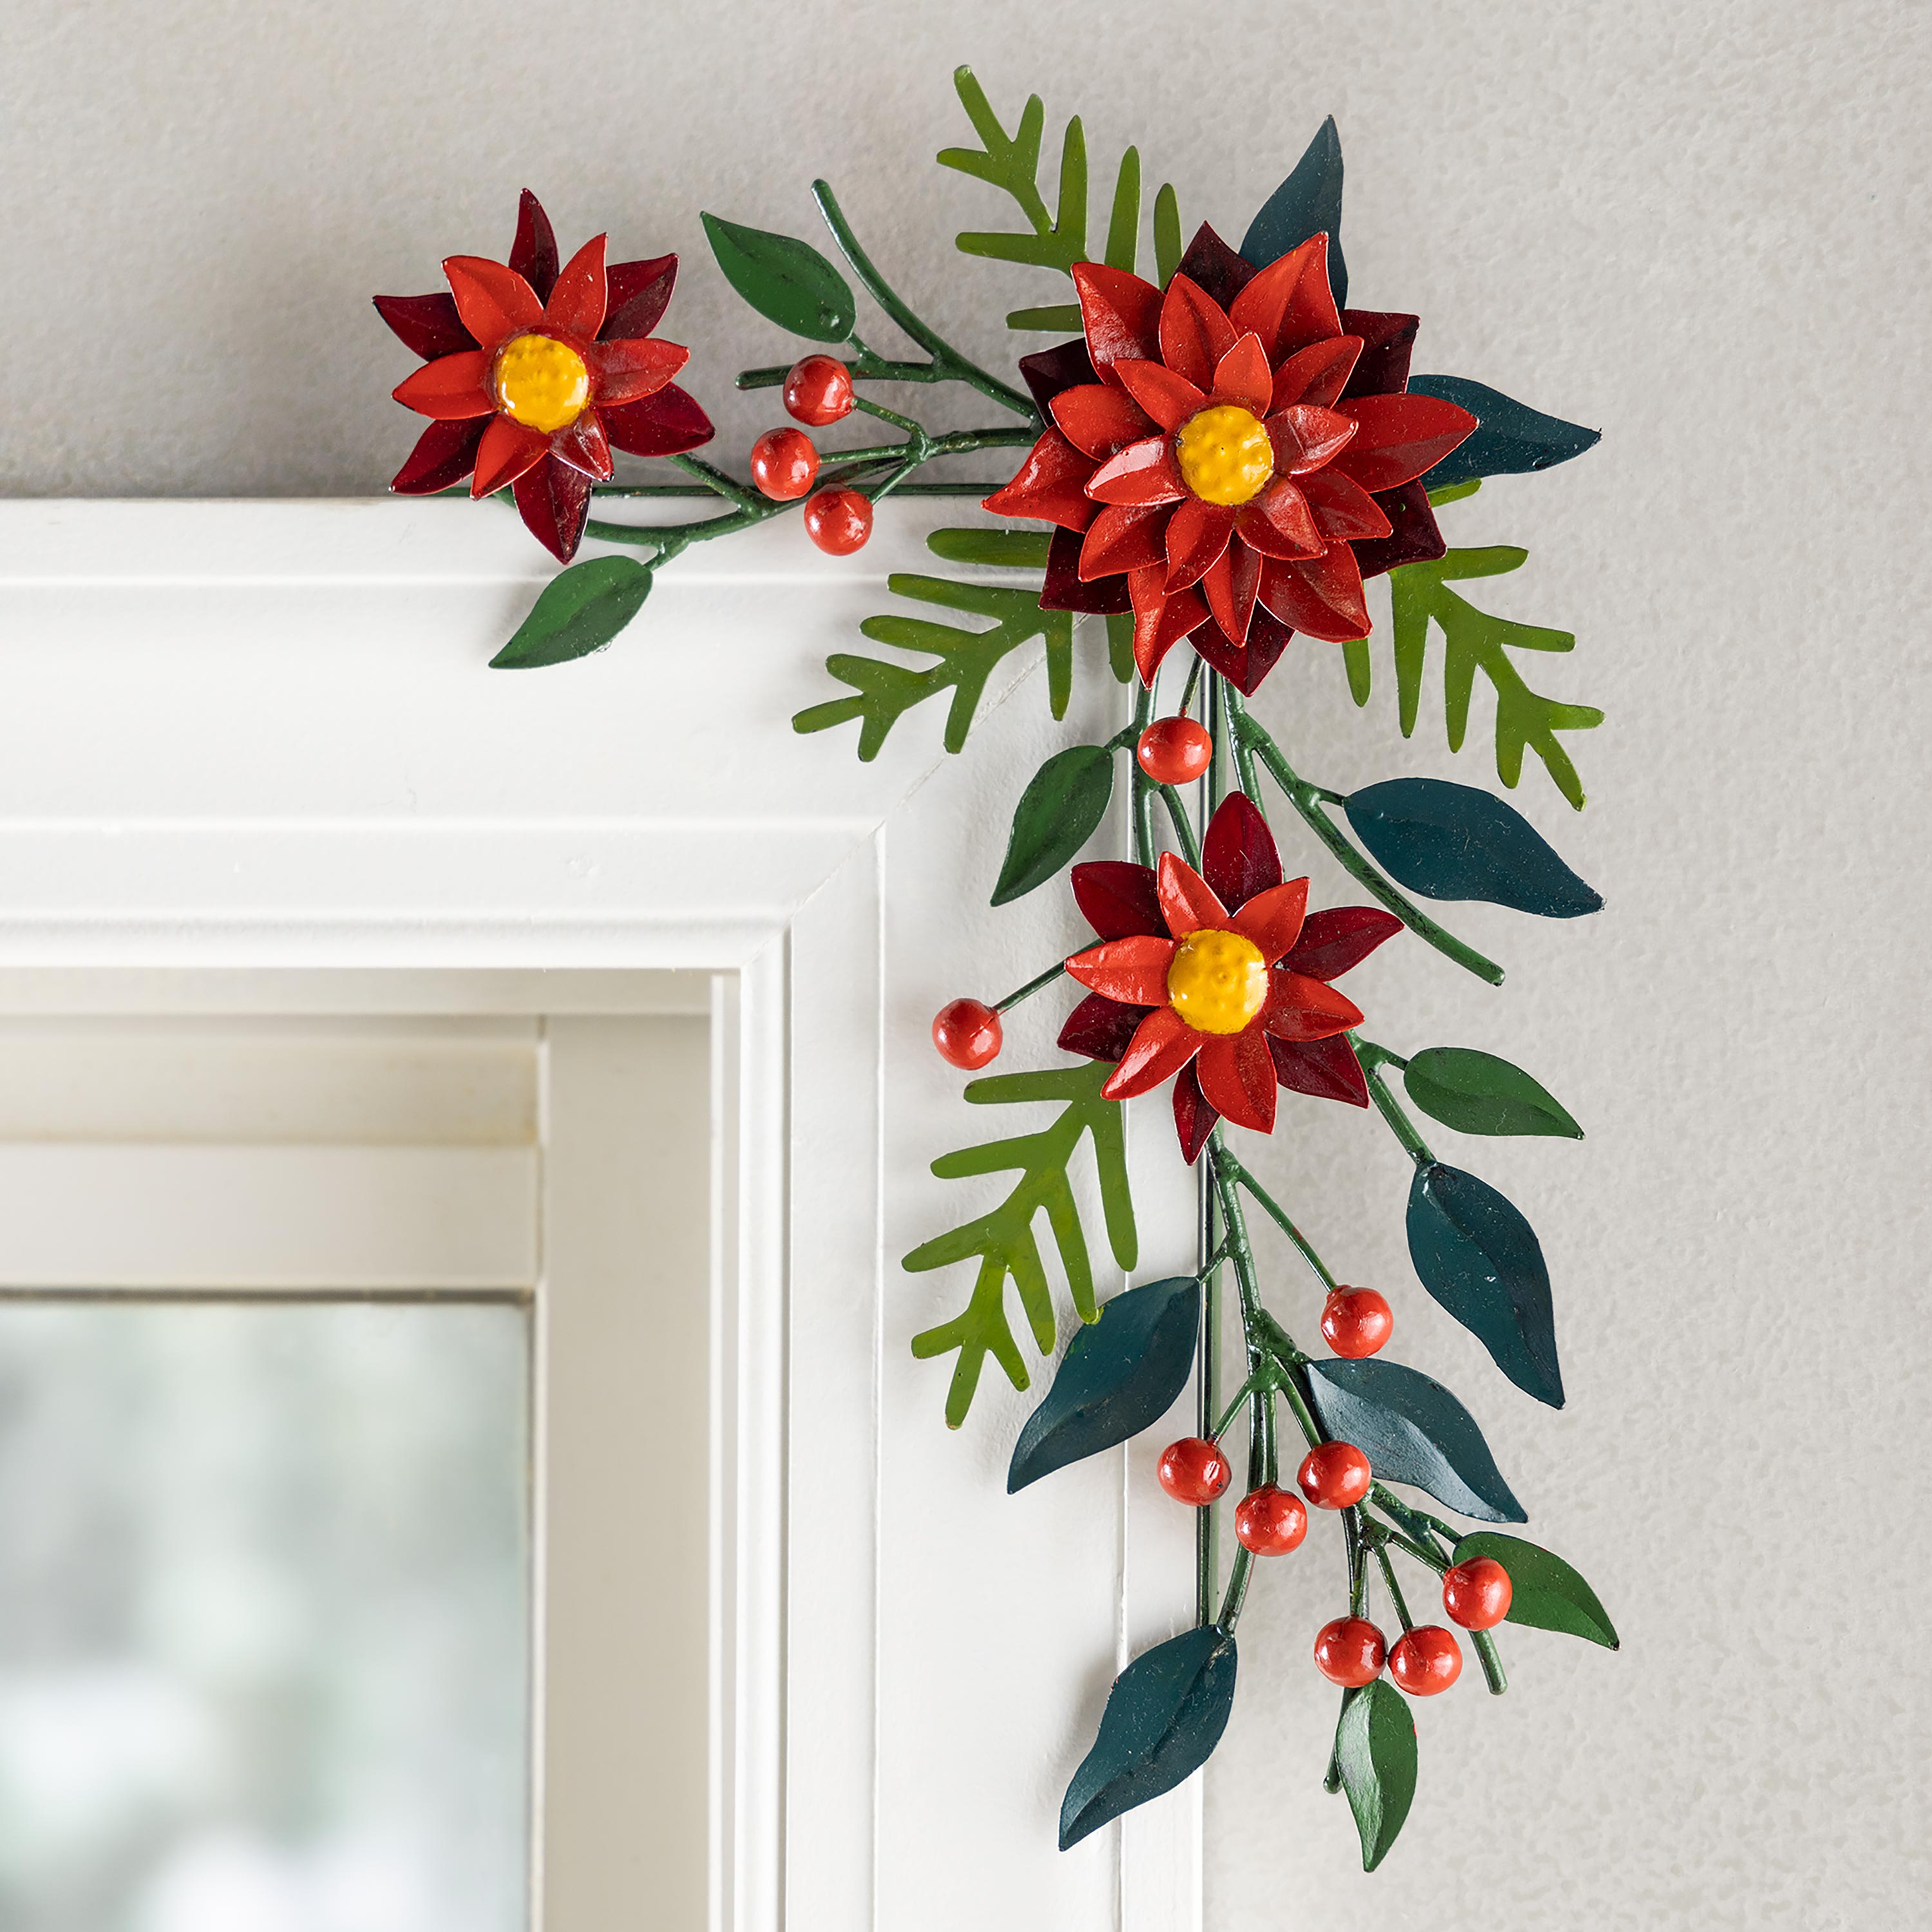 Poinsettia Holiday Corner for Easy Decorating - Right